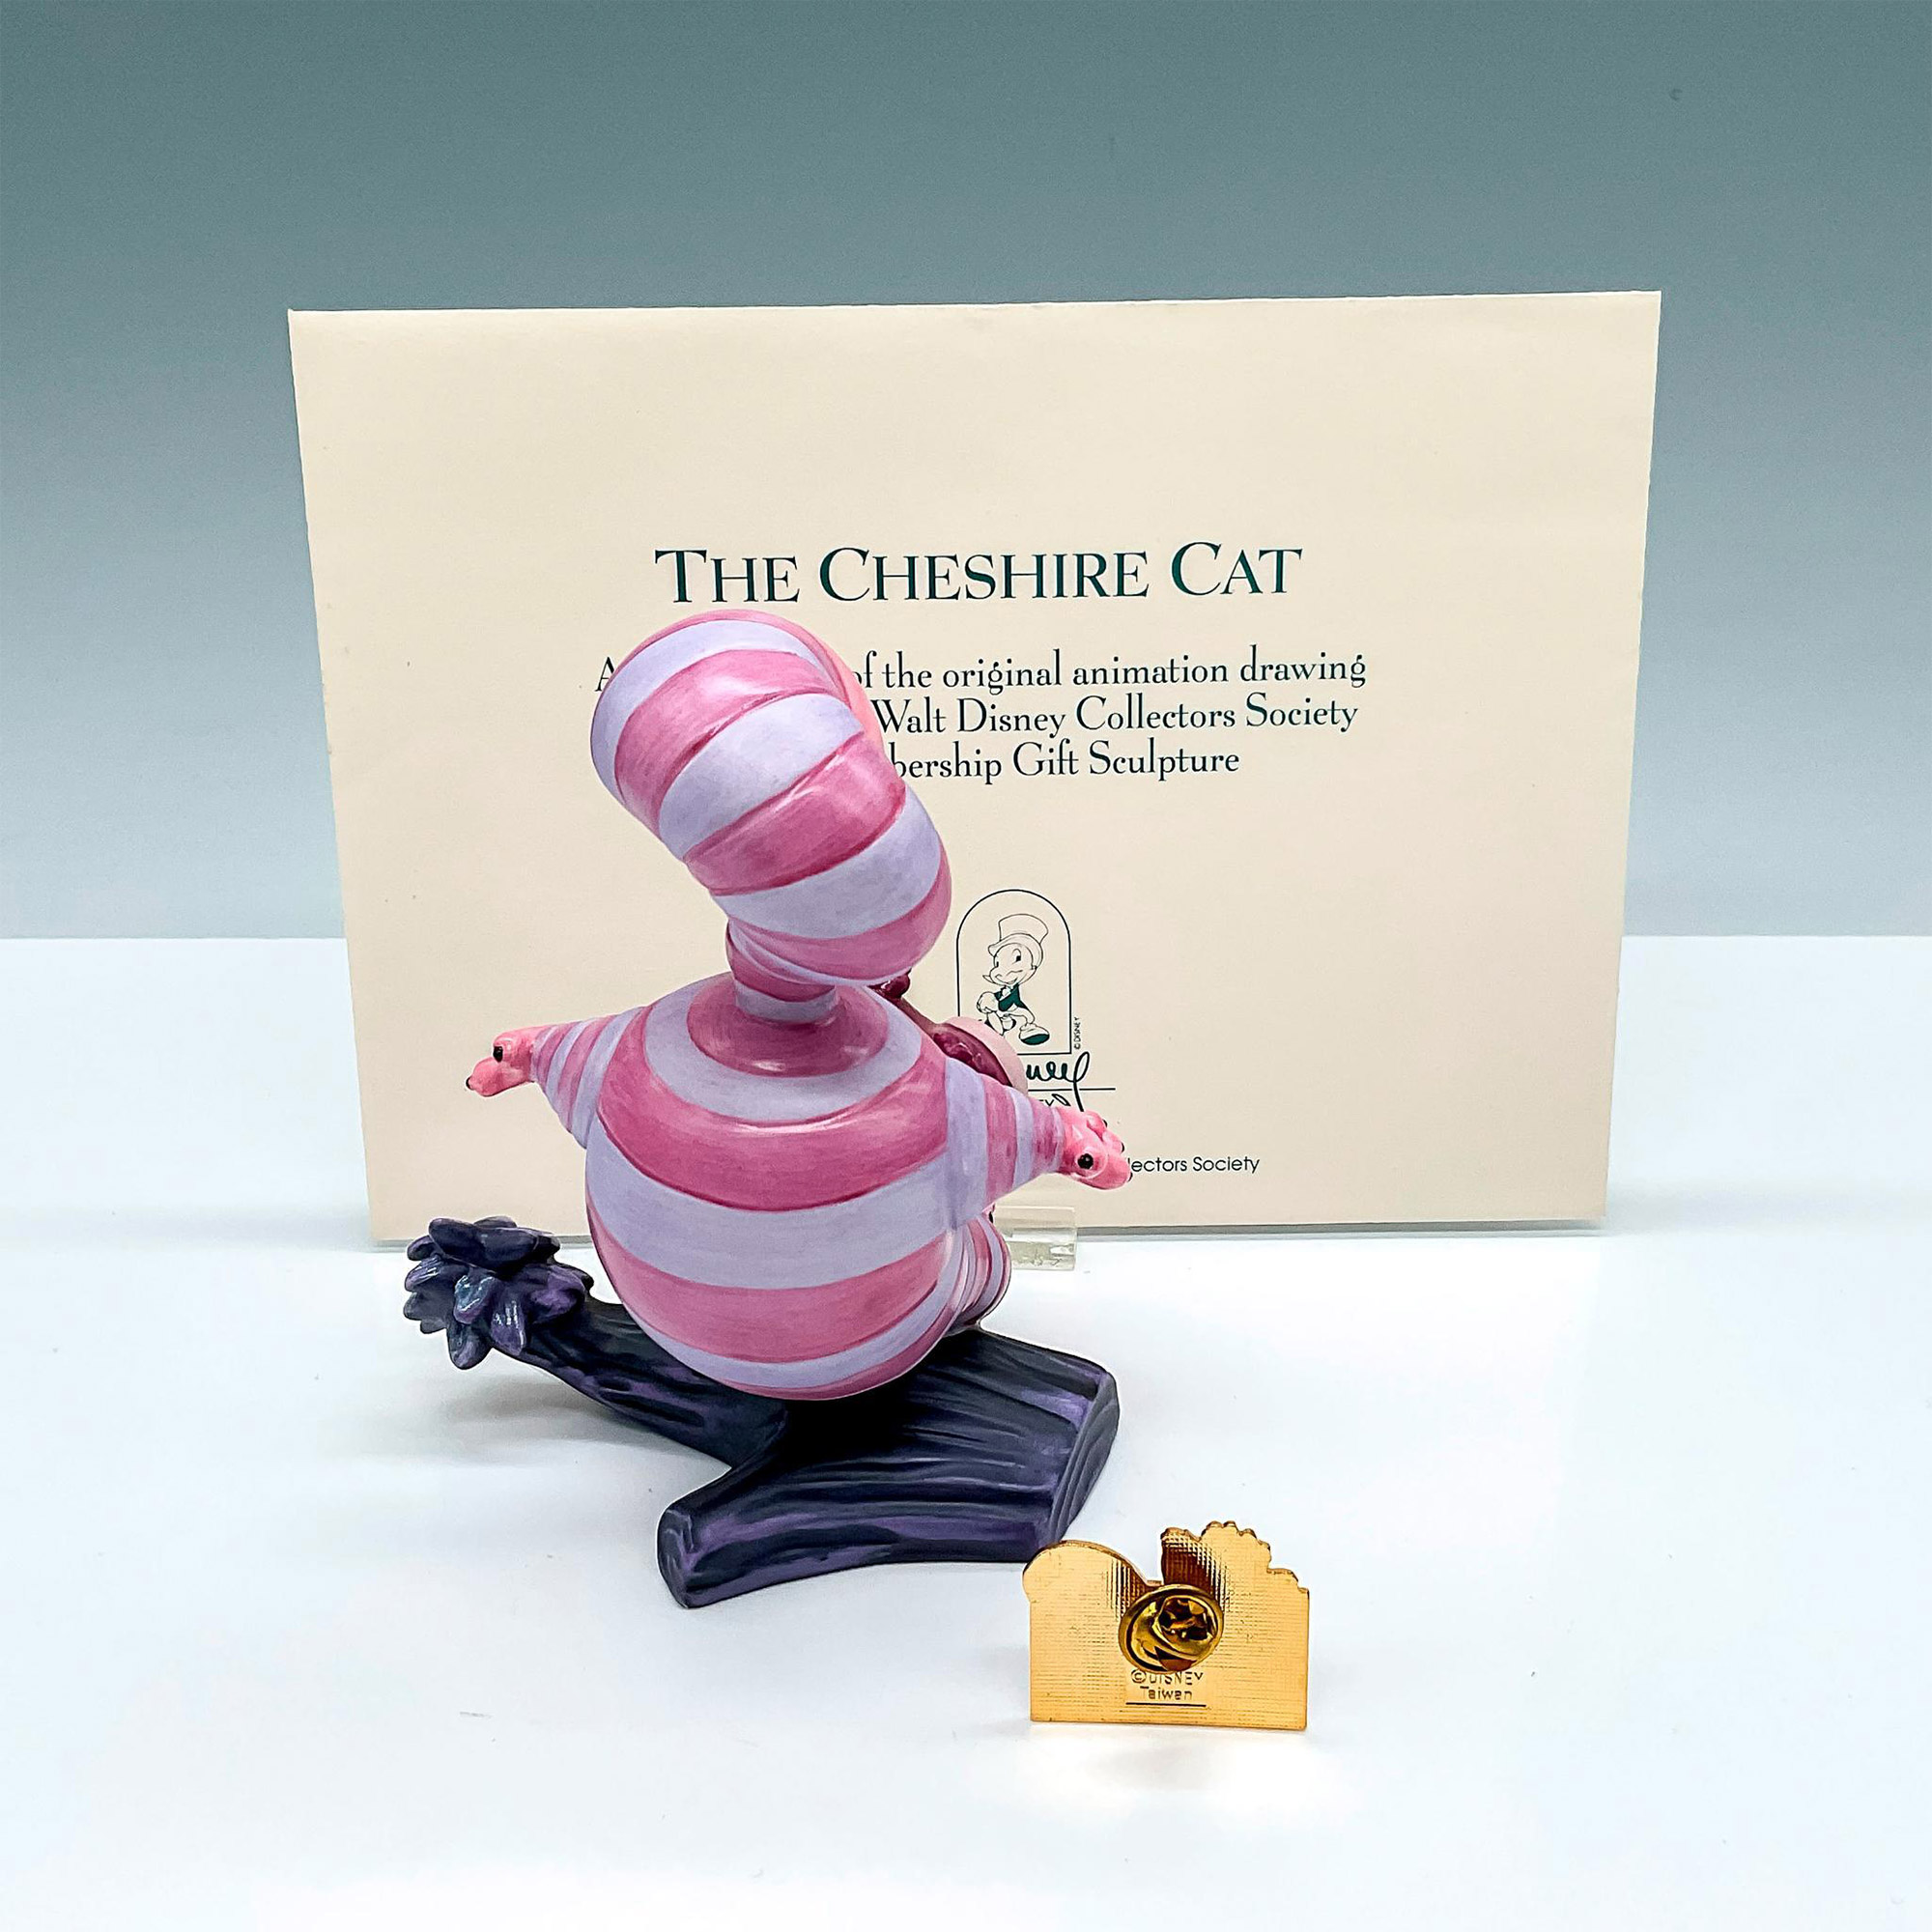 3pc Walt Disney Classic Collection, Cheshire Cat, Pin, Print - Image 2 of 3